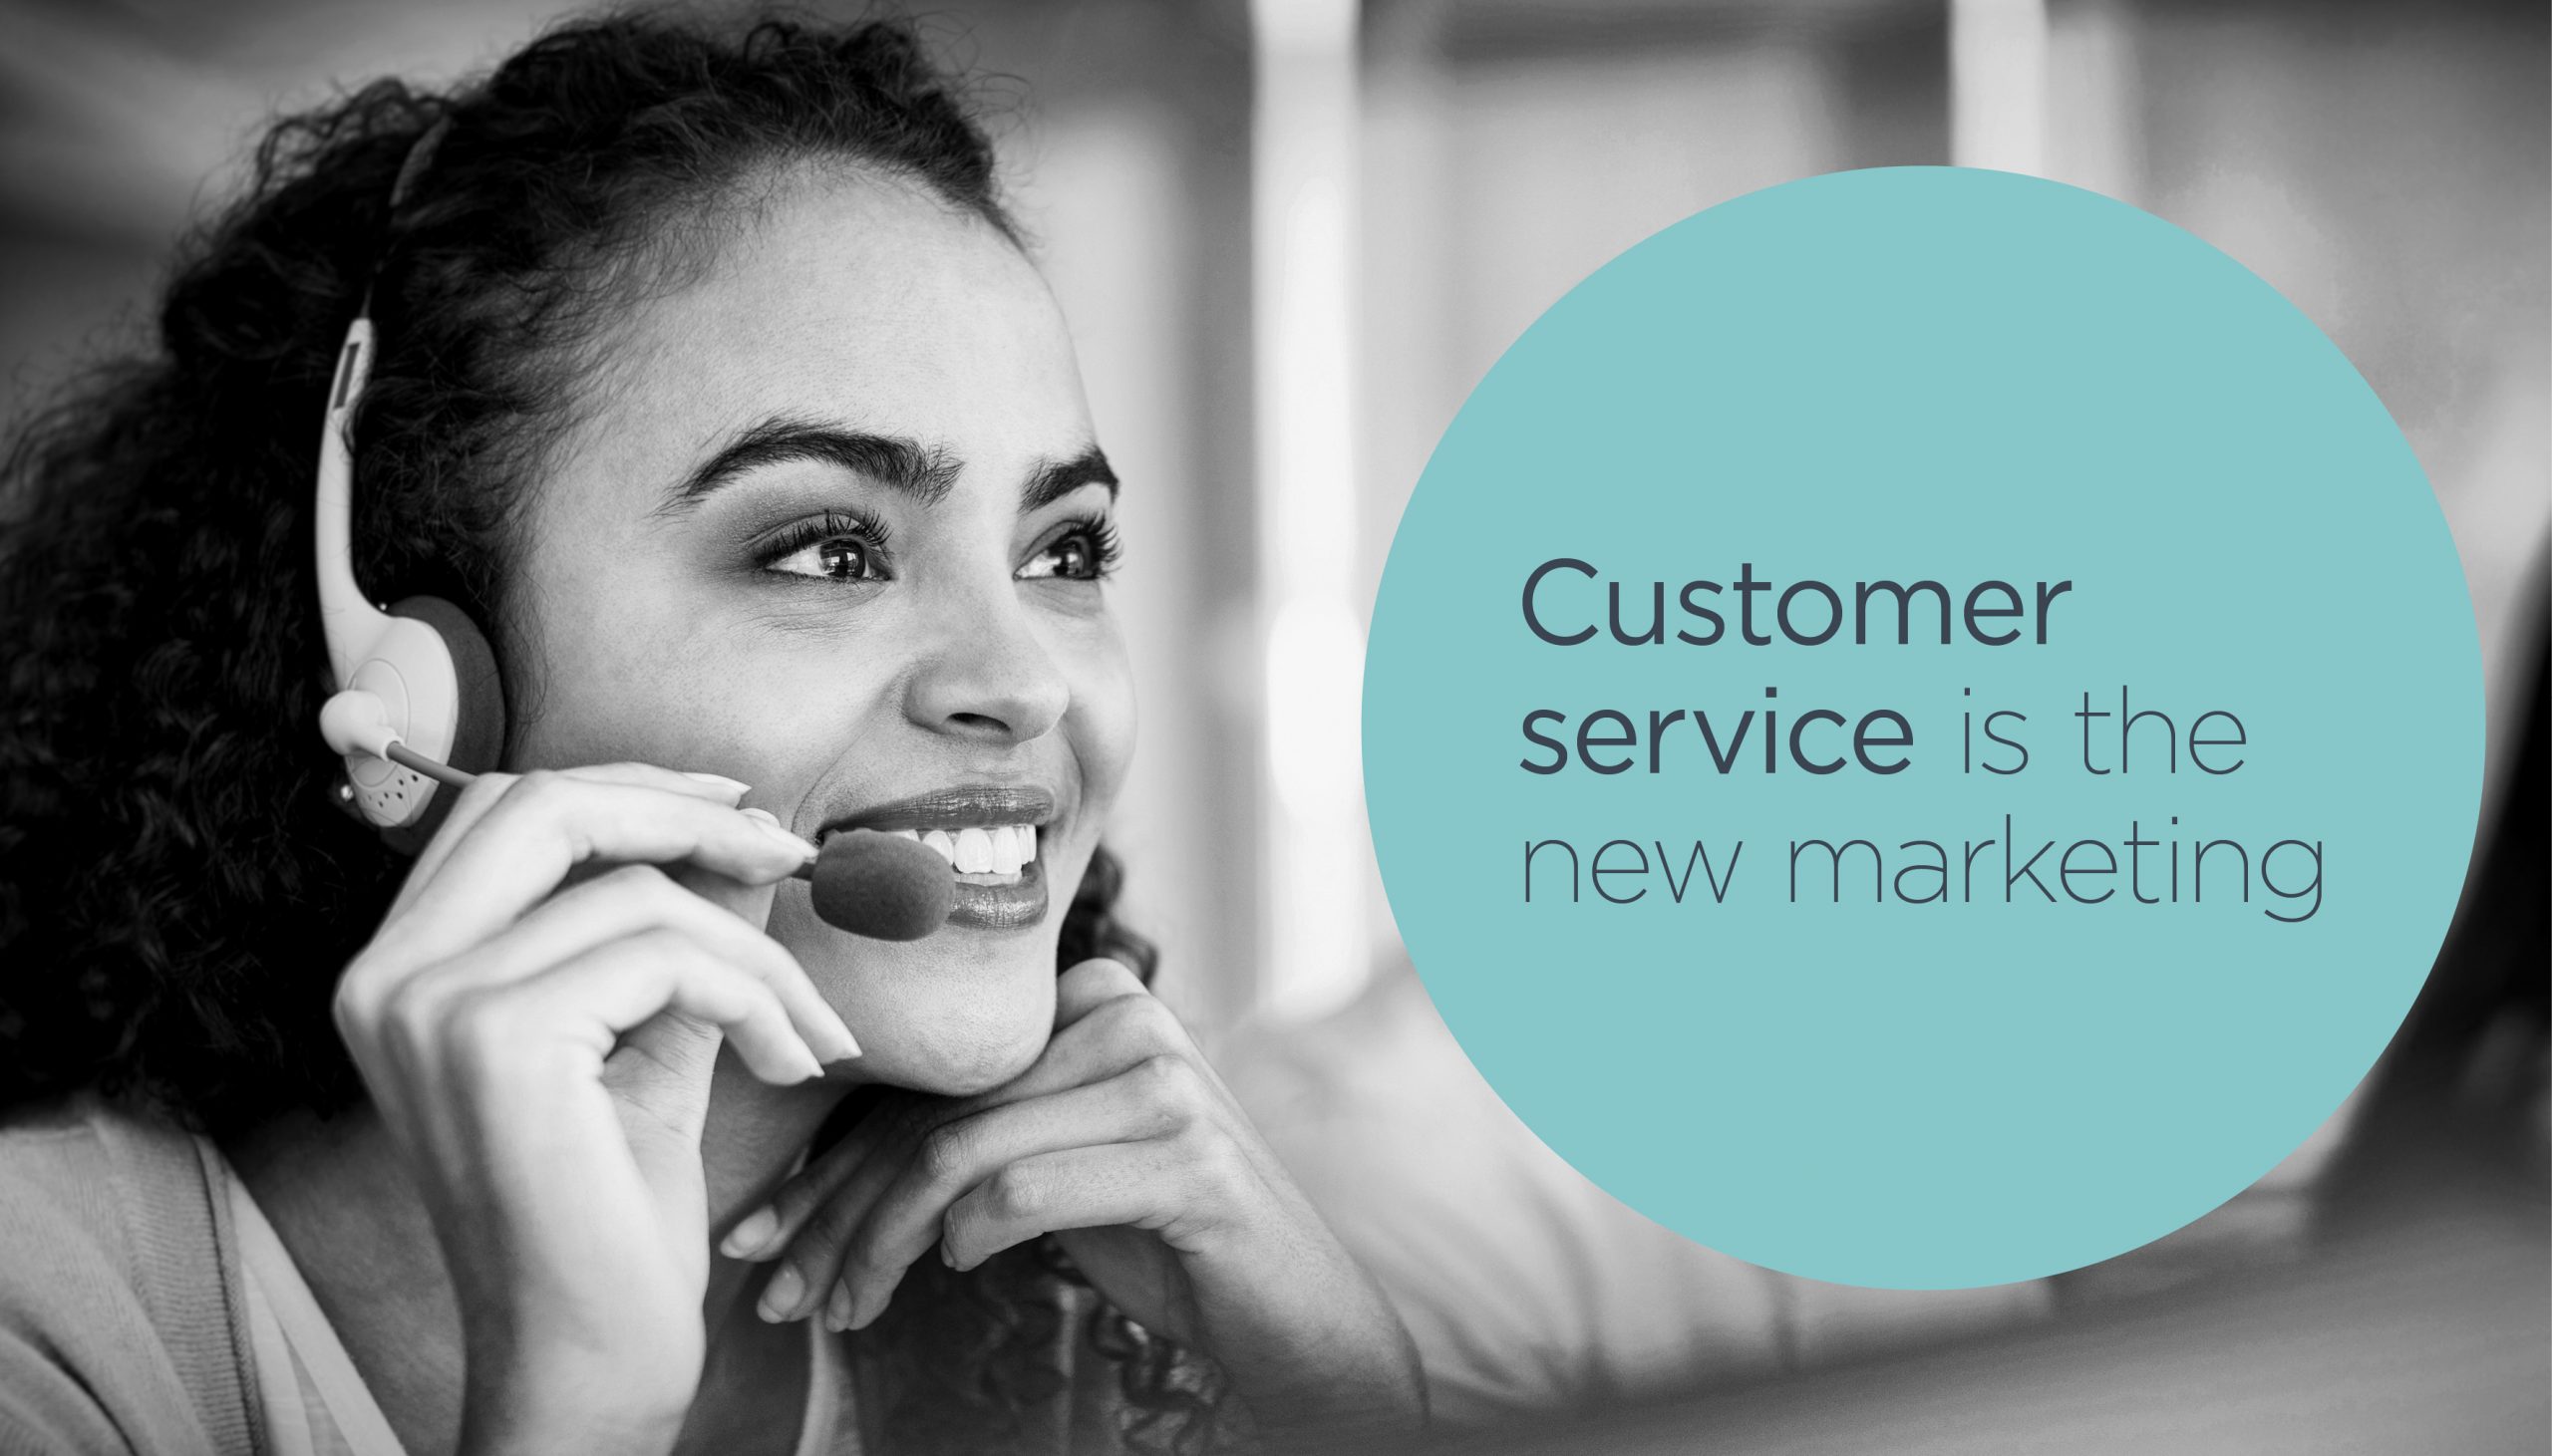 Why you need to align your Marketing with your Customer Service - and how to do it